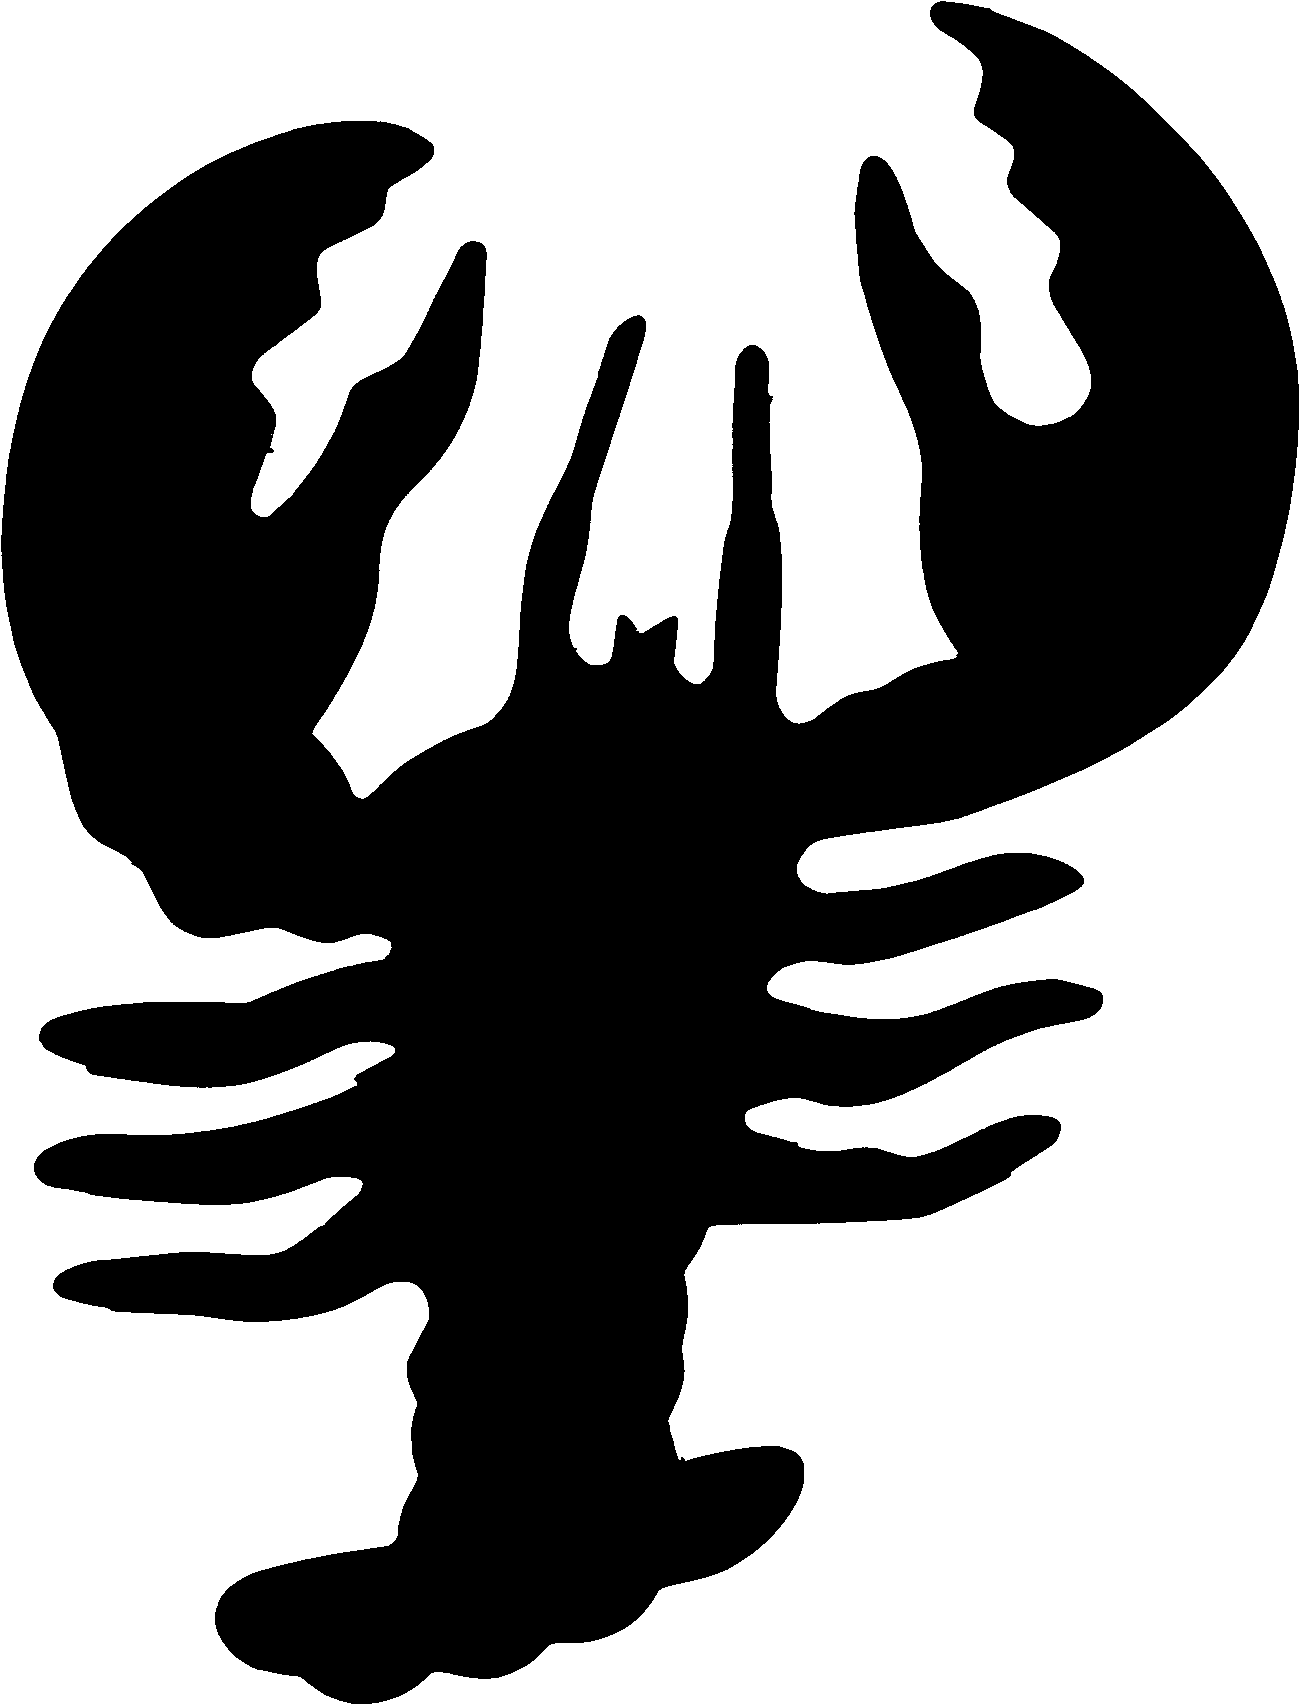 Lobster Silhouette | Clipart Panda - Free Clipart Images